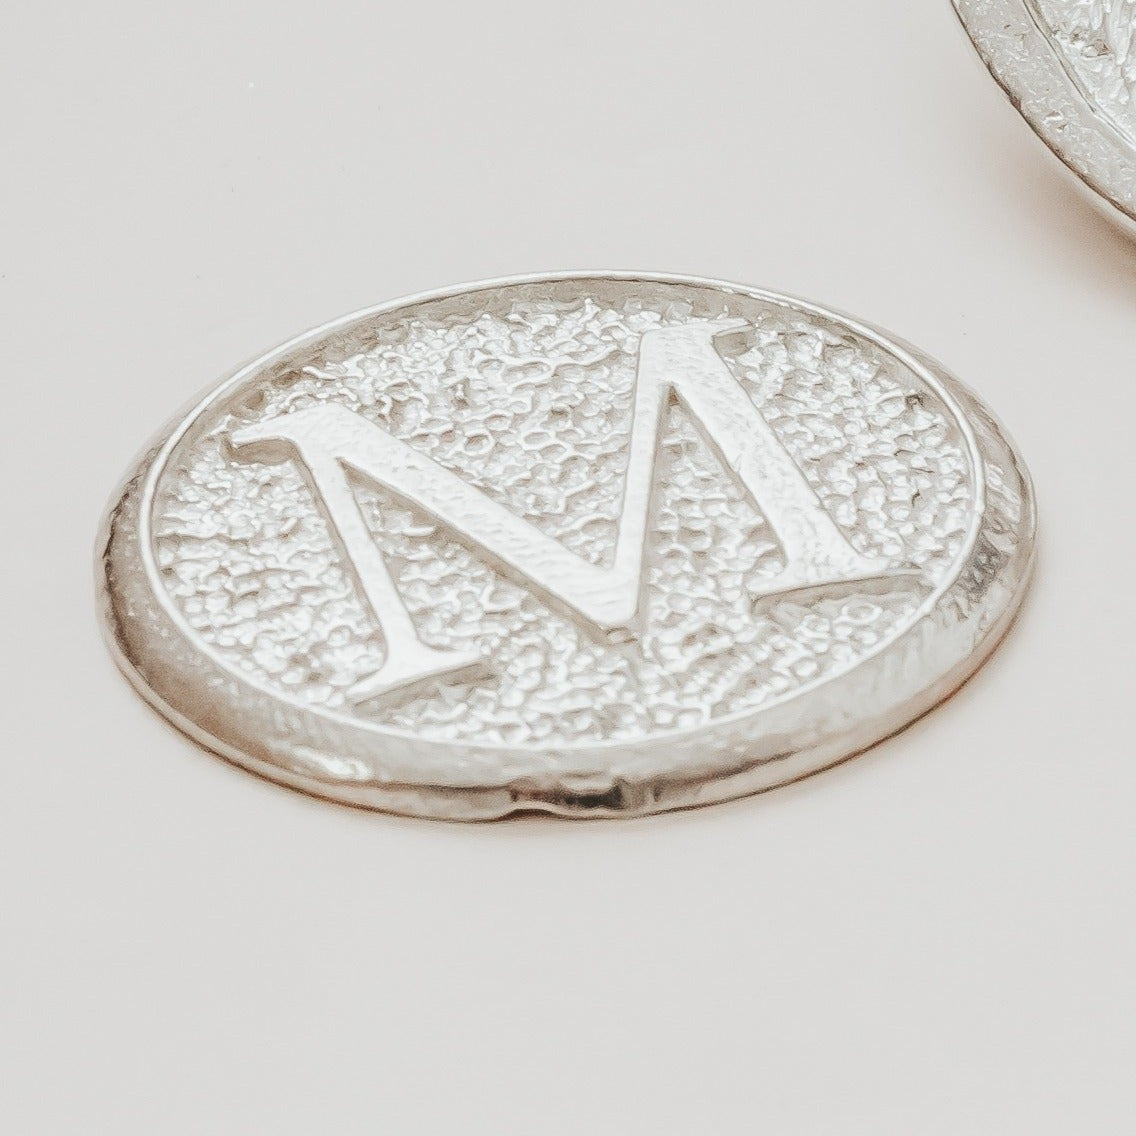 Monogram Golf Ball Marker - Lucky Coin for Golfer - Gift Ideas for Father's Day